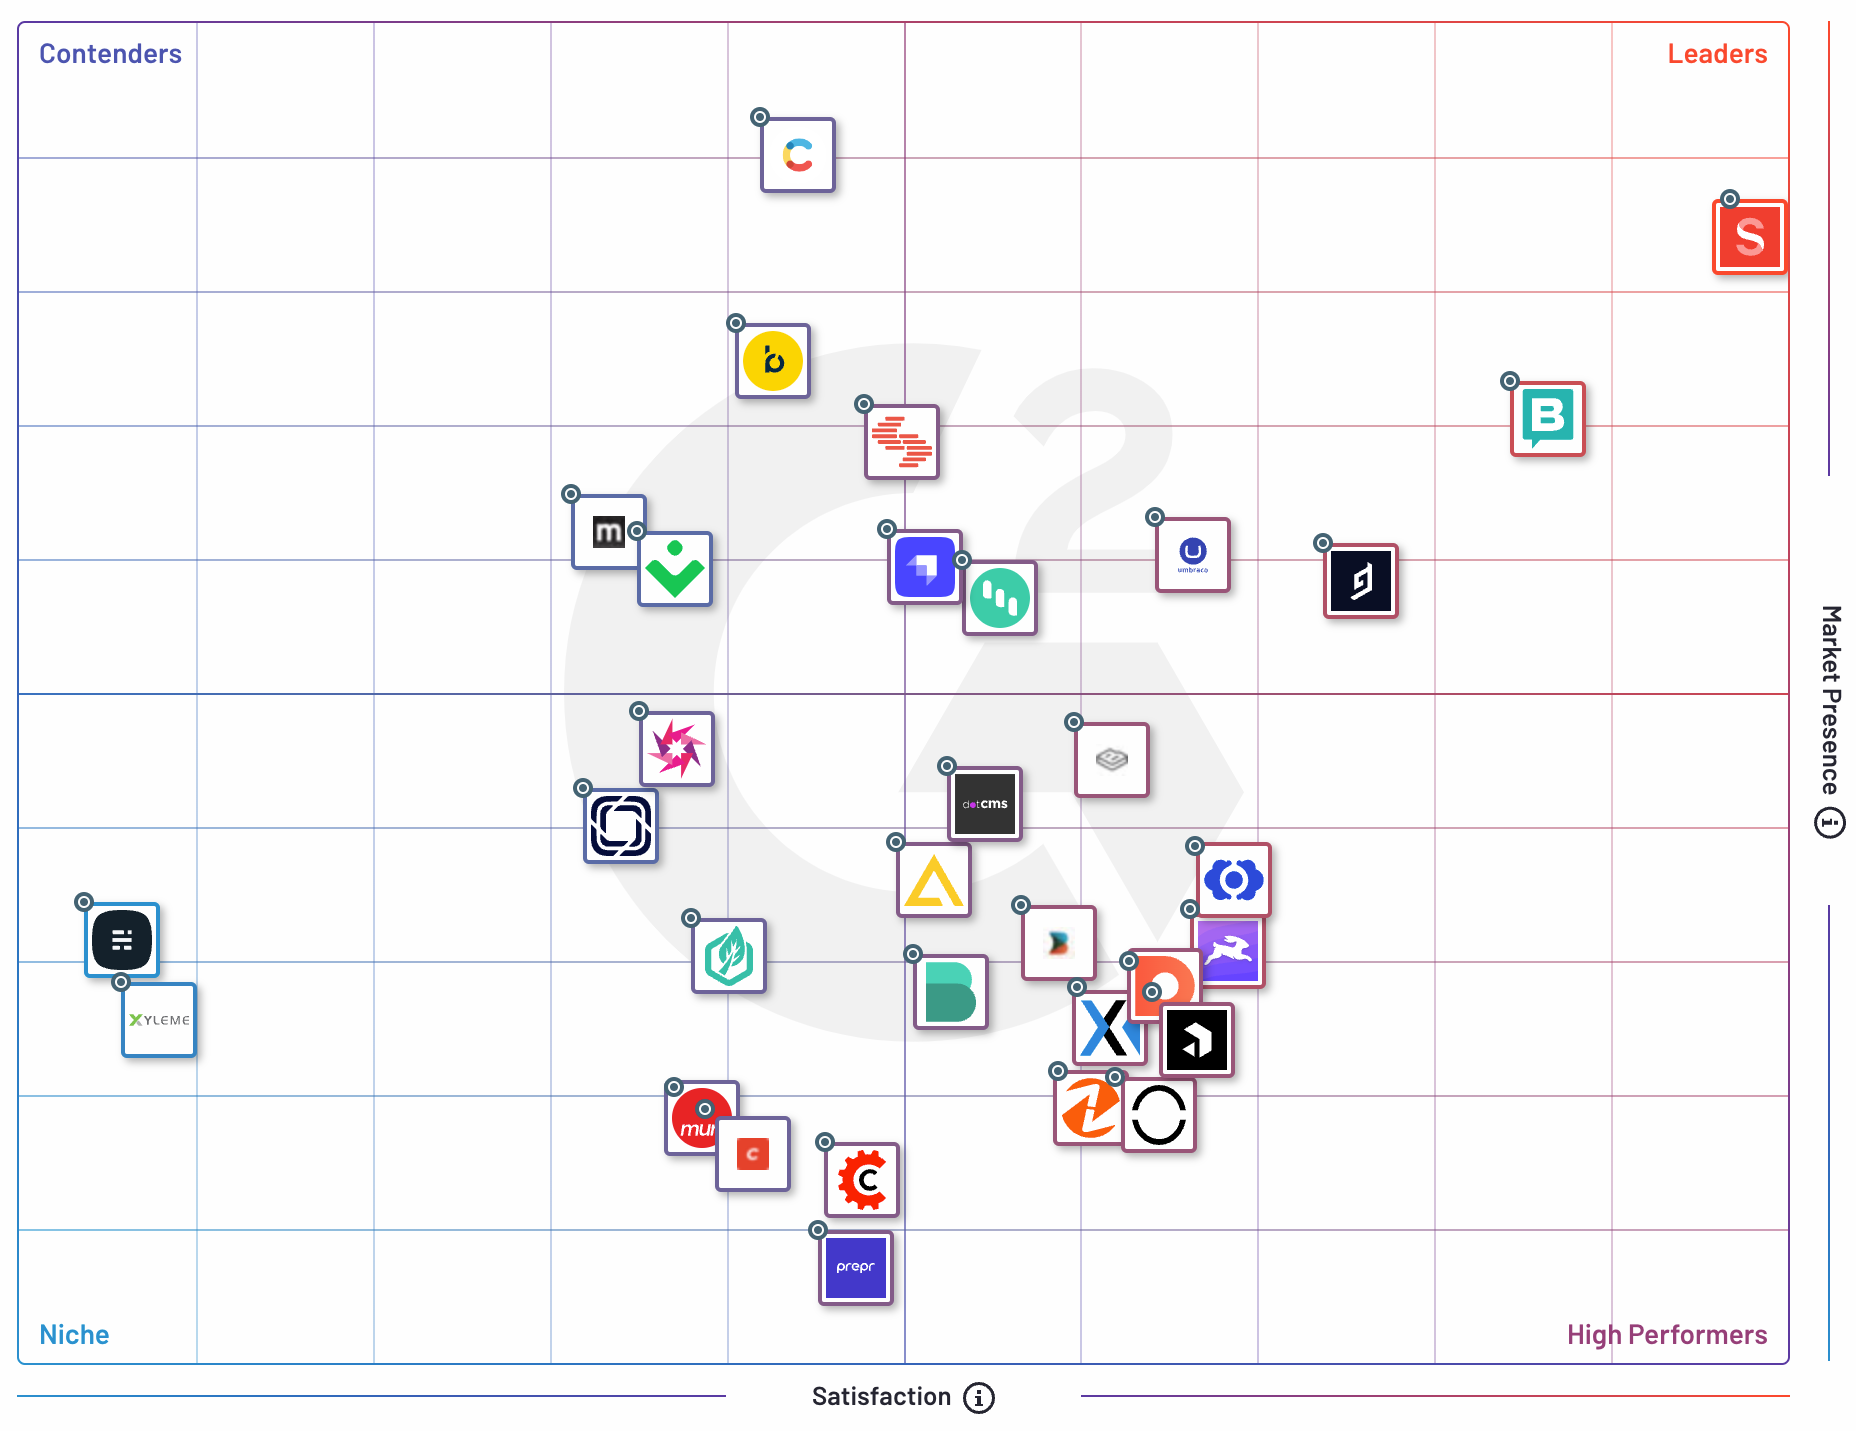 Grid of G2 reviews showing headless CMS brands ranked by satisfaction and performance with Sanity.io leading on both